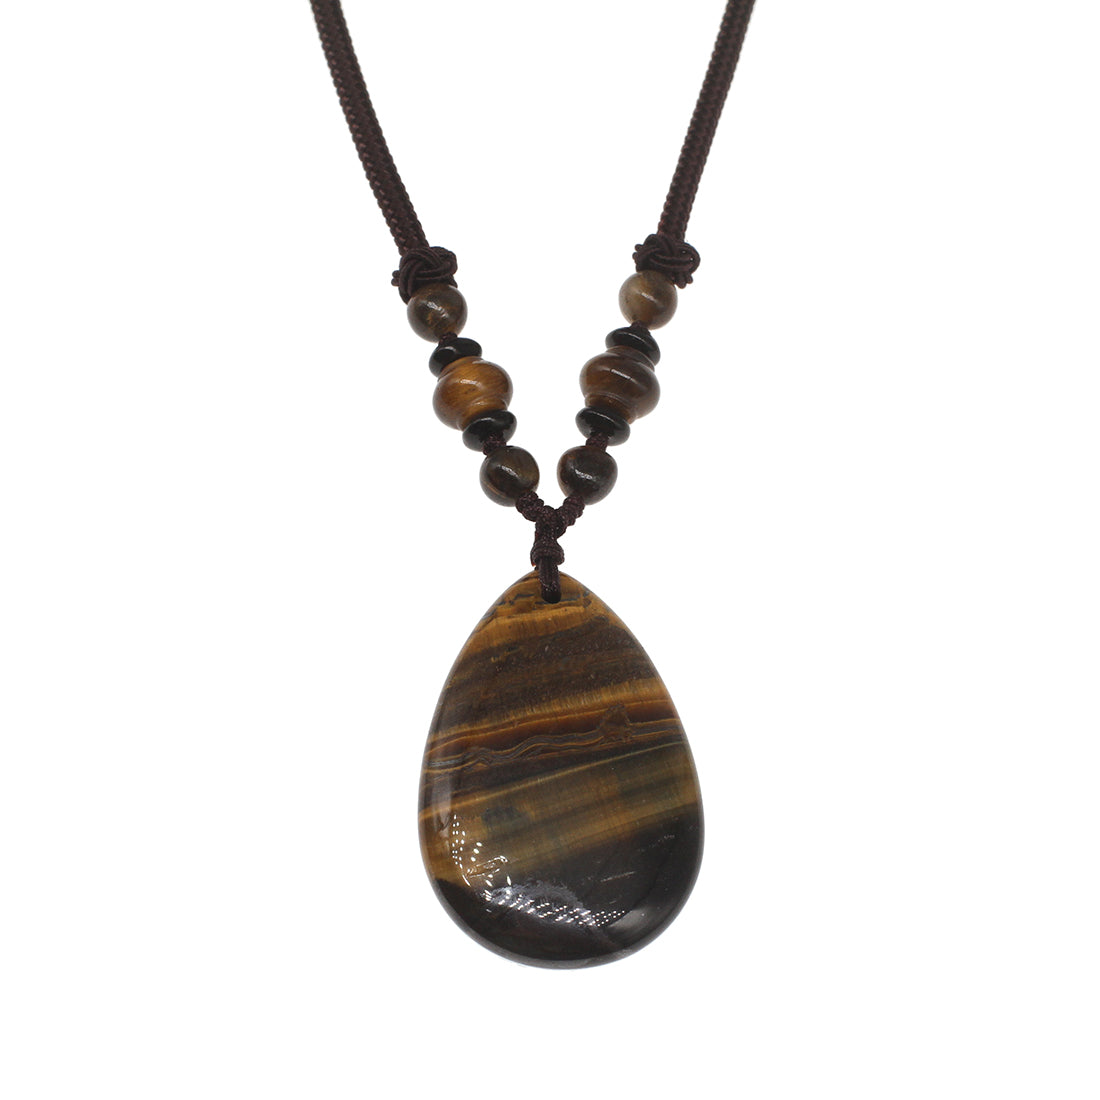 Tigers Eye Gemstone Pendant with Necklace - 42x27mm - Length 12 inch - 26g - NEW922